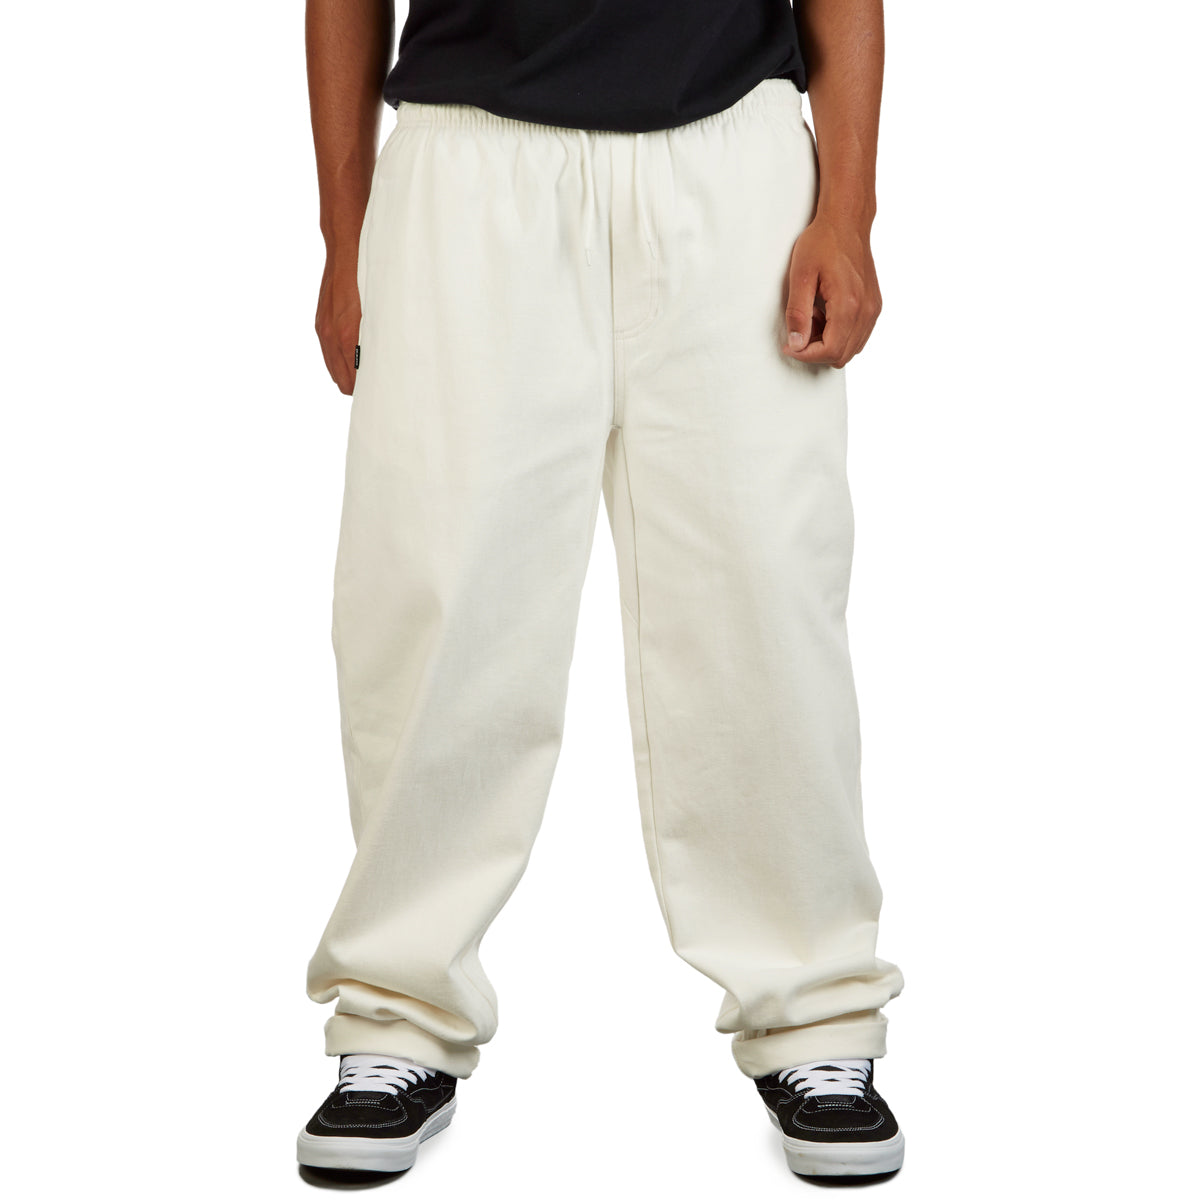 CCS Easy Twill Pants - Off White image 4